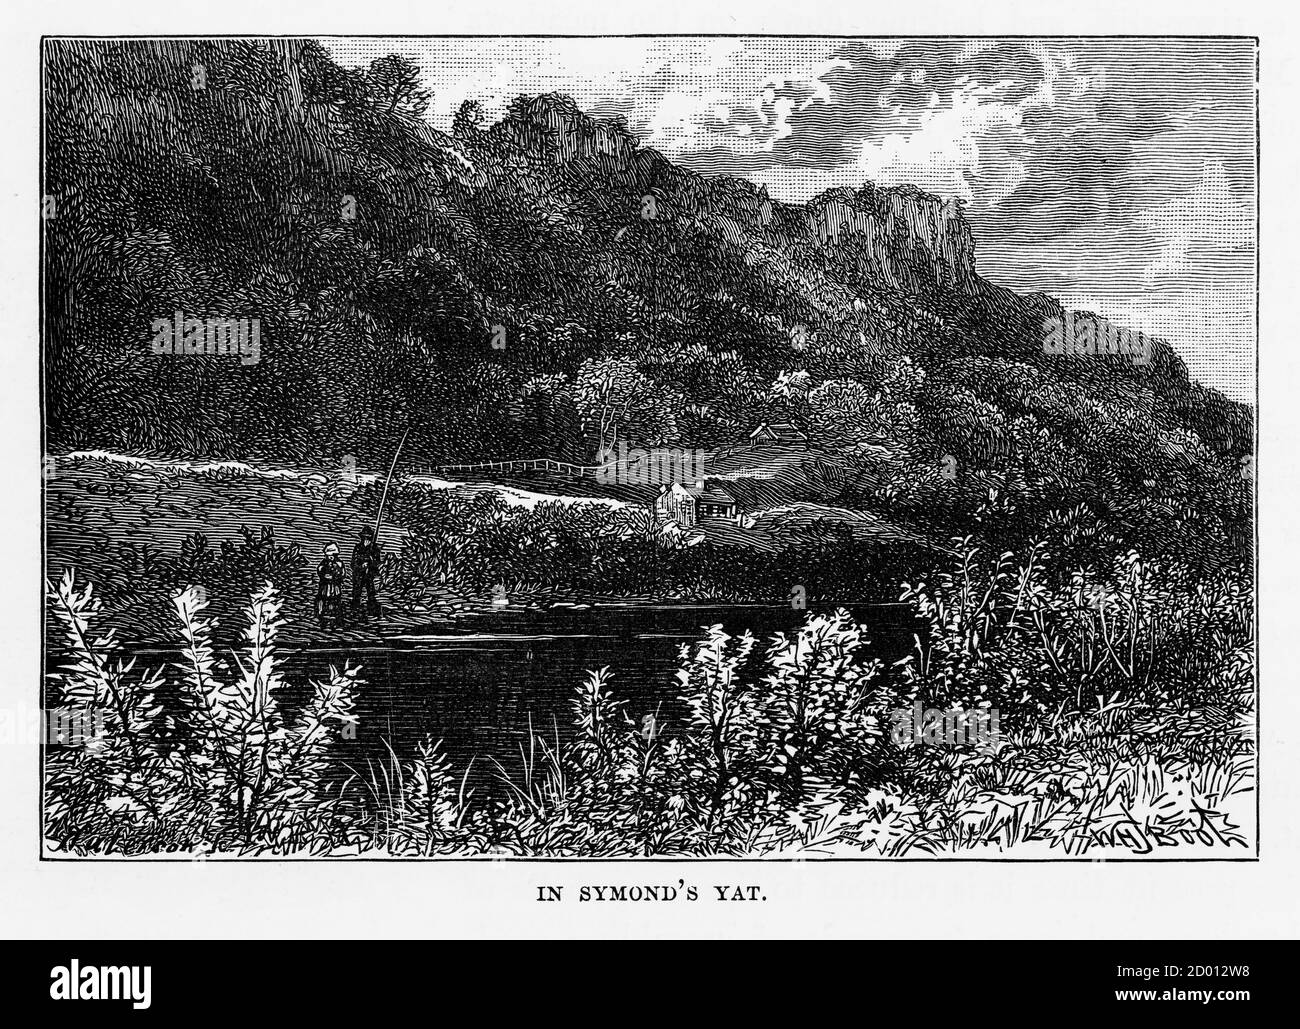 Symond’s Yat, Monmouth, Herefordshire, England Victorian Engraving, 1840 Stock Photo